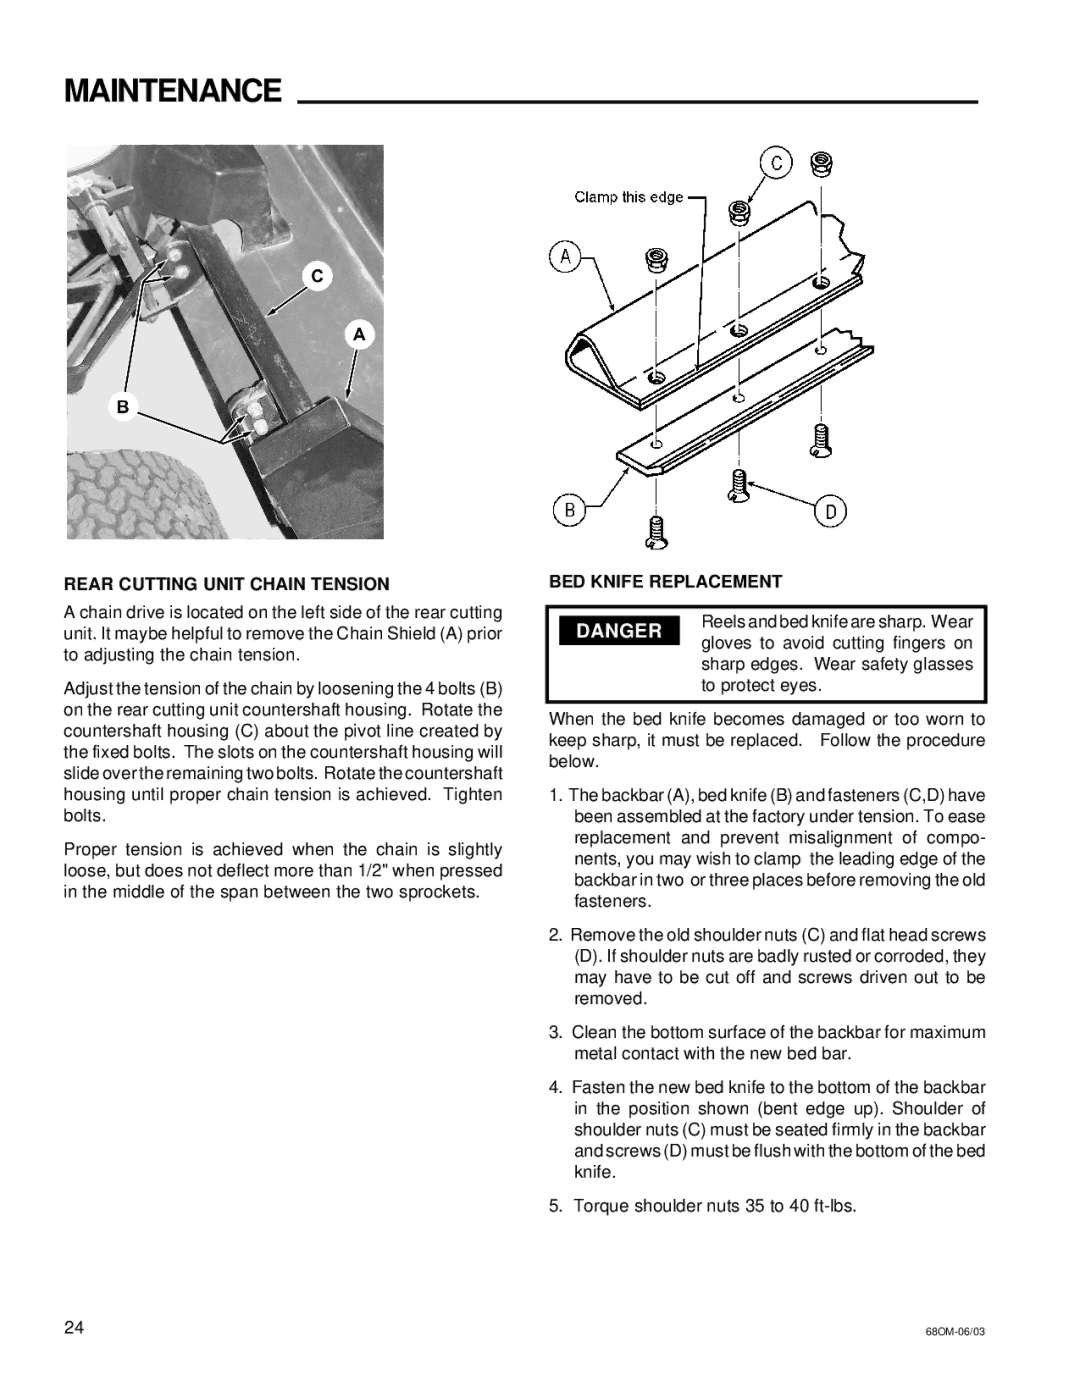 National Mower 68 SR, 68 DL owner manual Rear Cutting Unit Chain Tension, BED Knife Replacement 